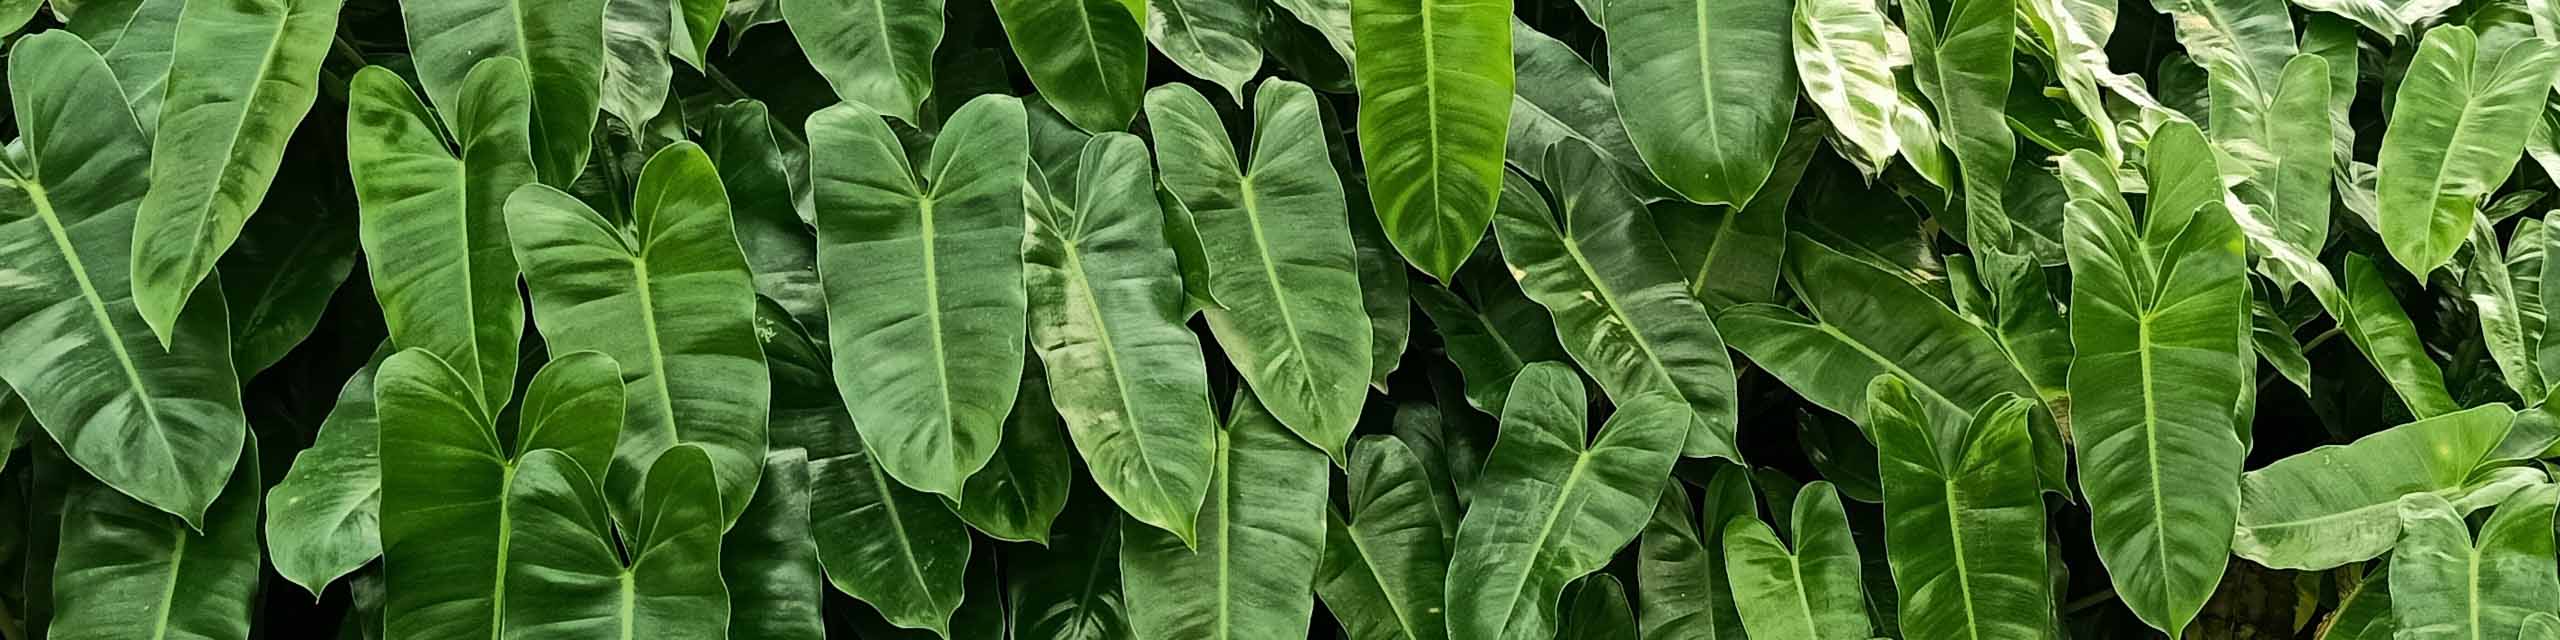 Rows of large philodendron leaves.